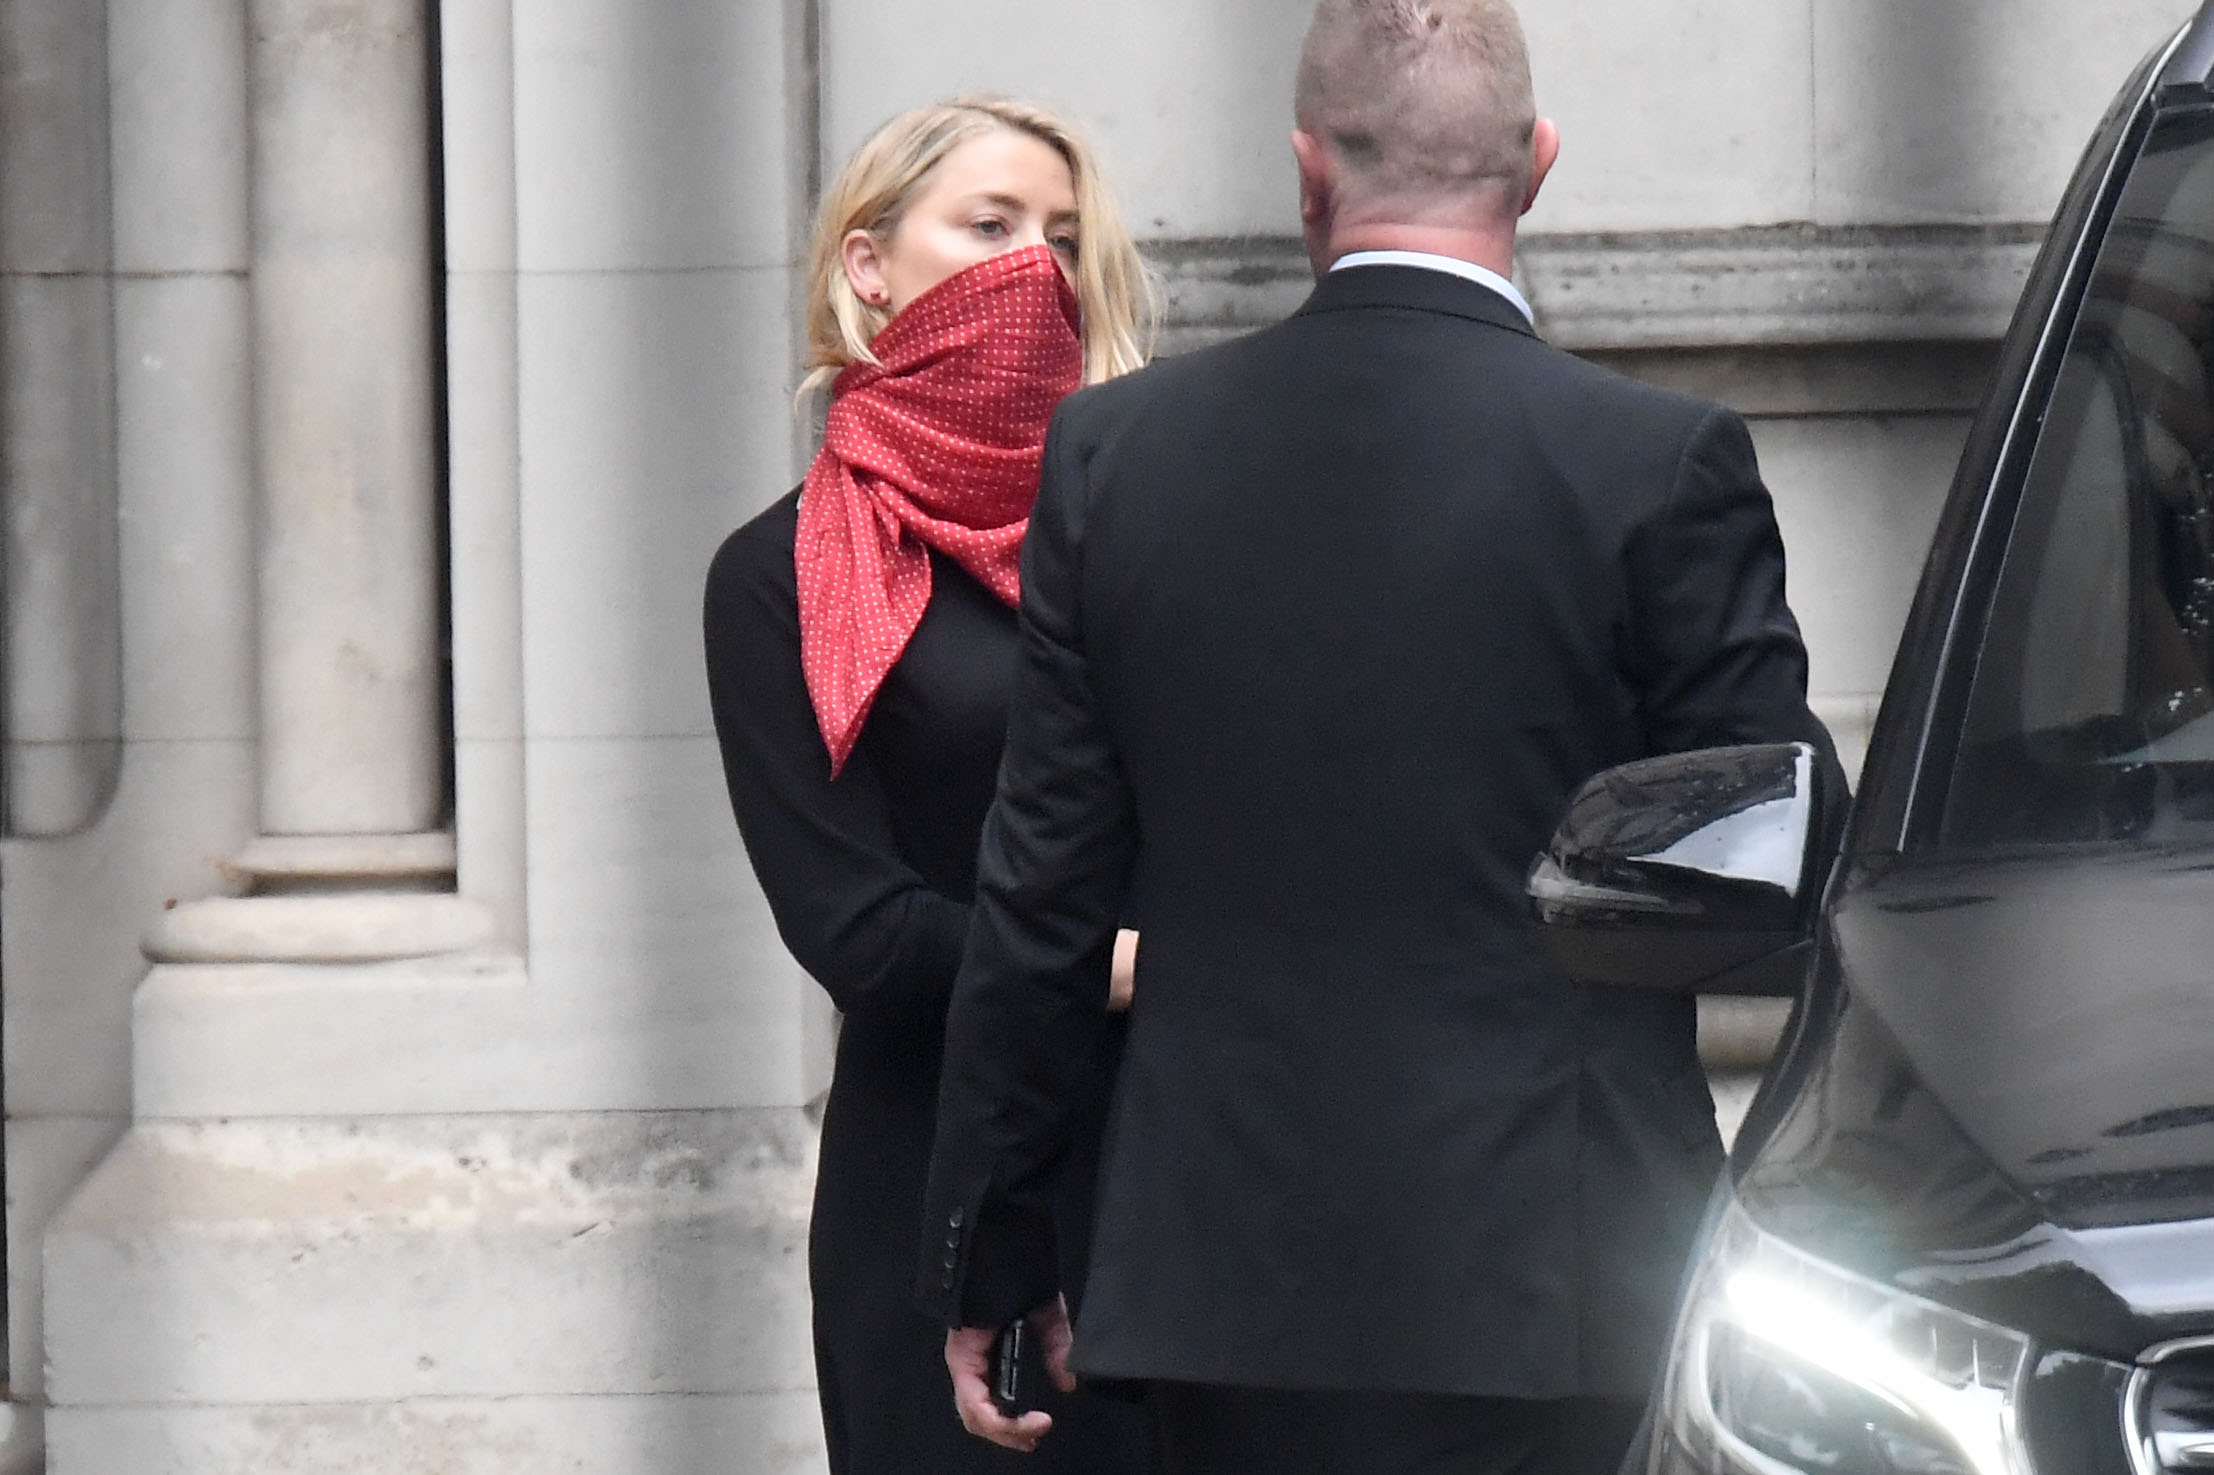 Amber Heard leaves The Royal Courts of Justice, on the Strand on July 8, 2020 in London, England. Hollywood actor Johnny Depp is taking News Group Newspapers, publishers of The Sun, to court over allegations that he was violent towards his ex-wife, Amber Heard, 34. (Photo by Peter Summers/Getty Images)